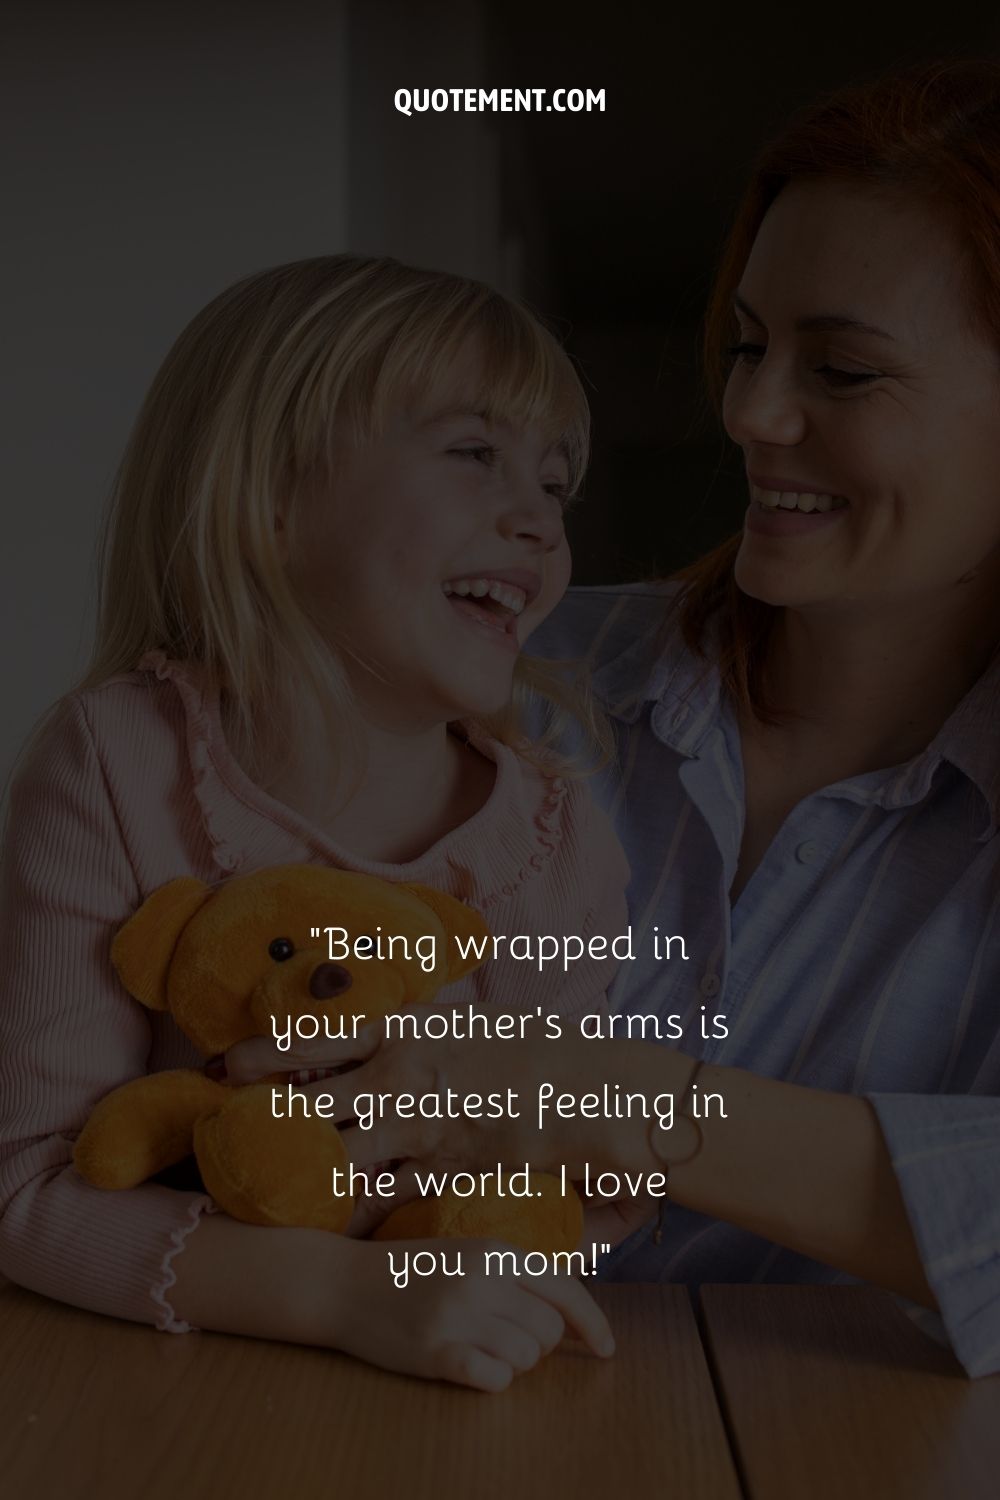 Being wrapped in your mother's arms is the greatest feeling in the world.